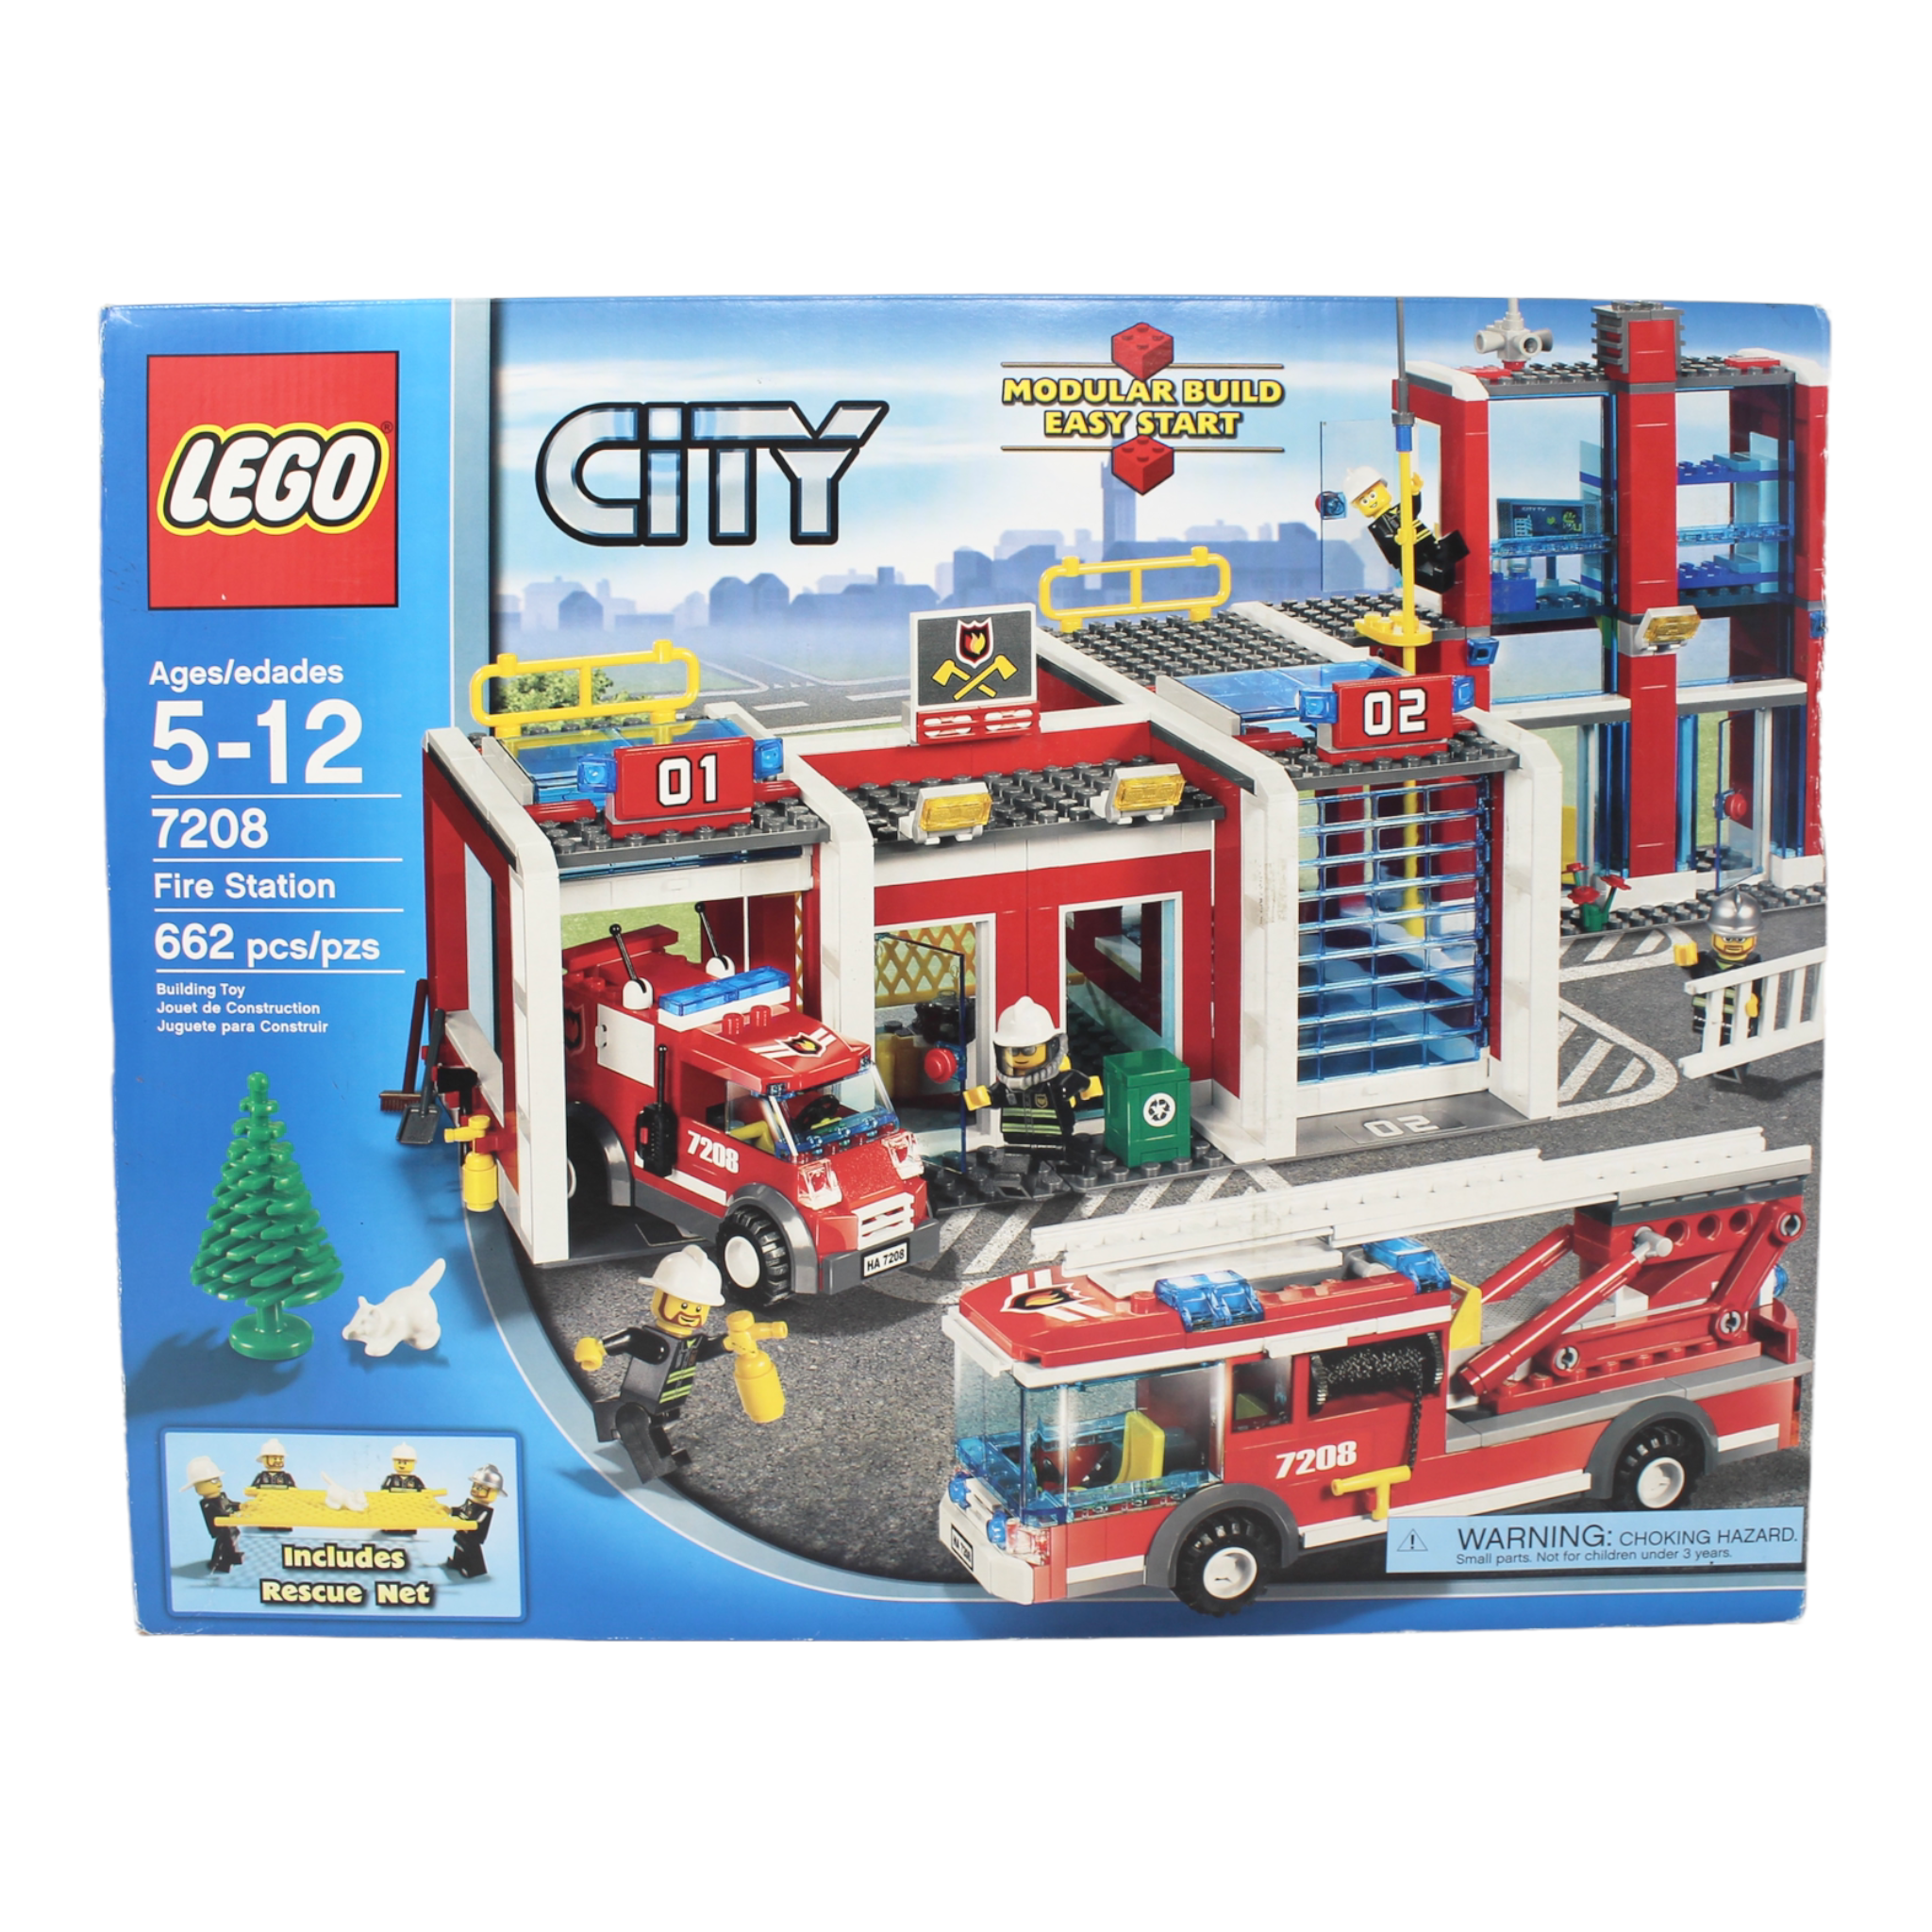 Certified Used Set 7208 City Fire Station